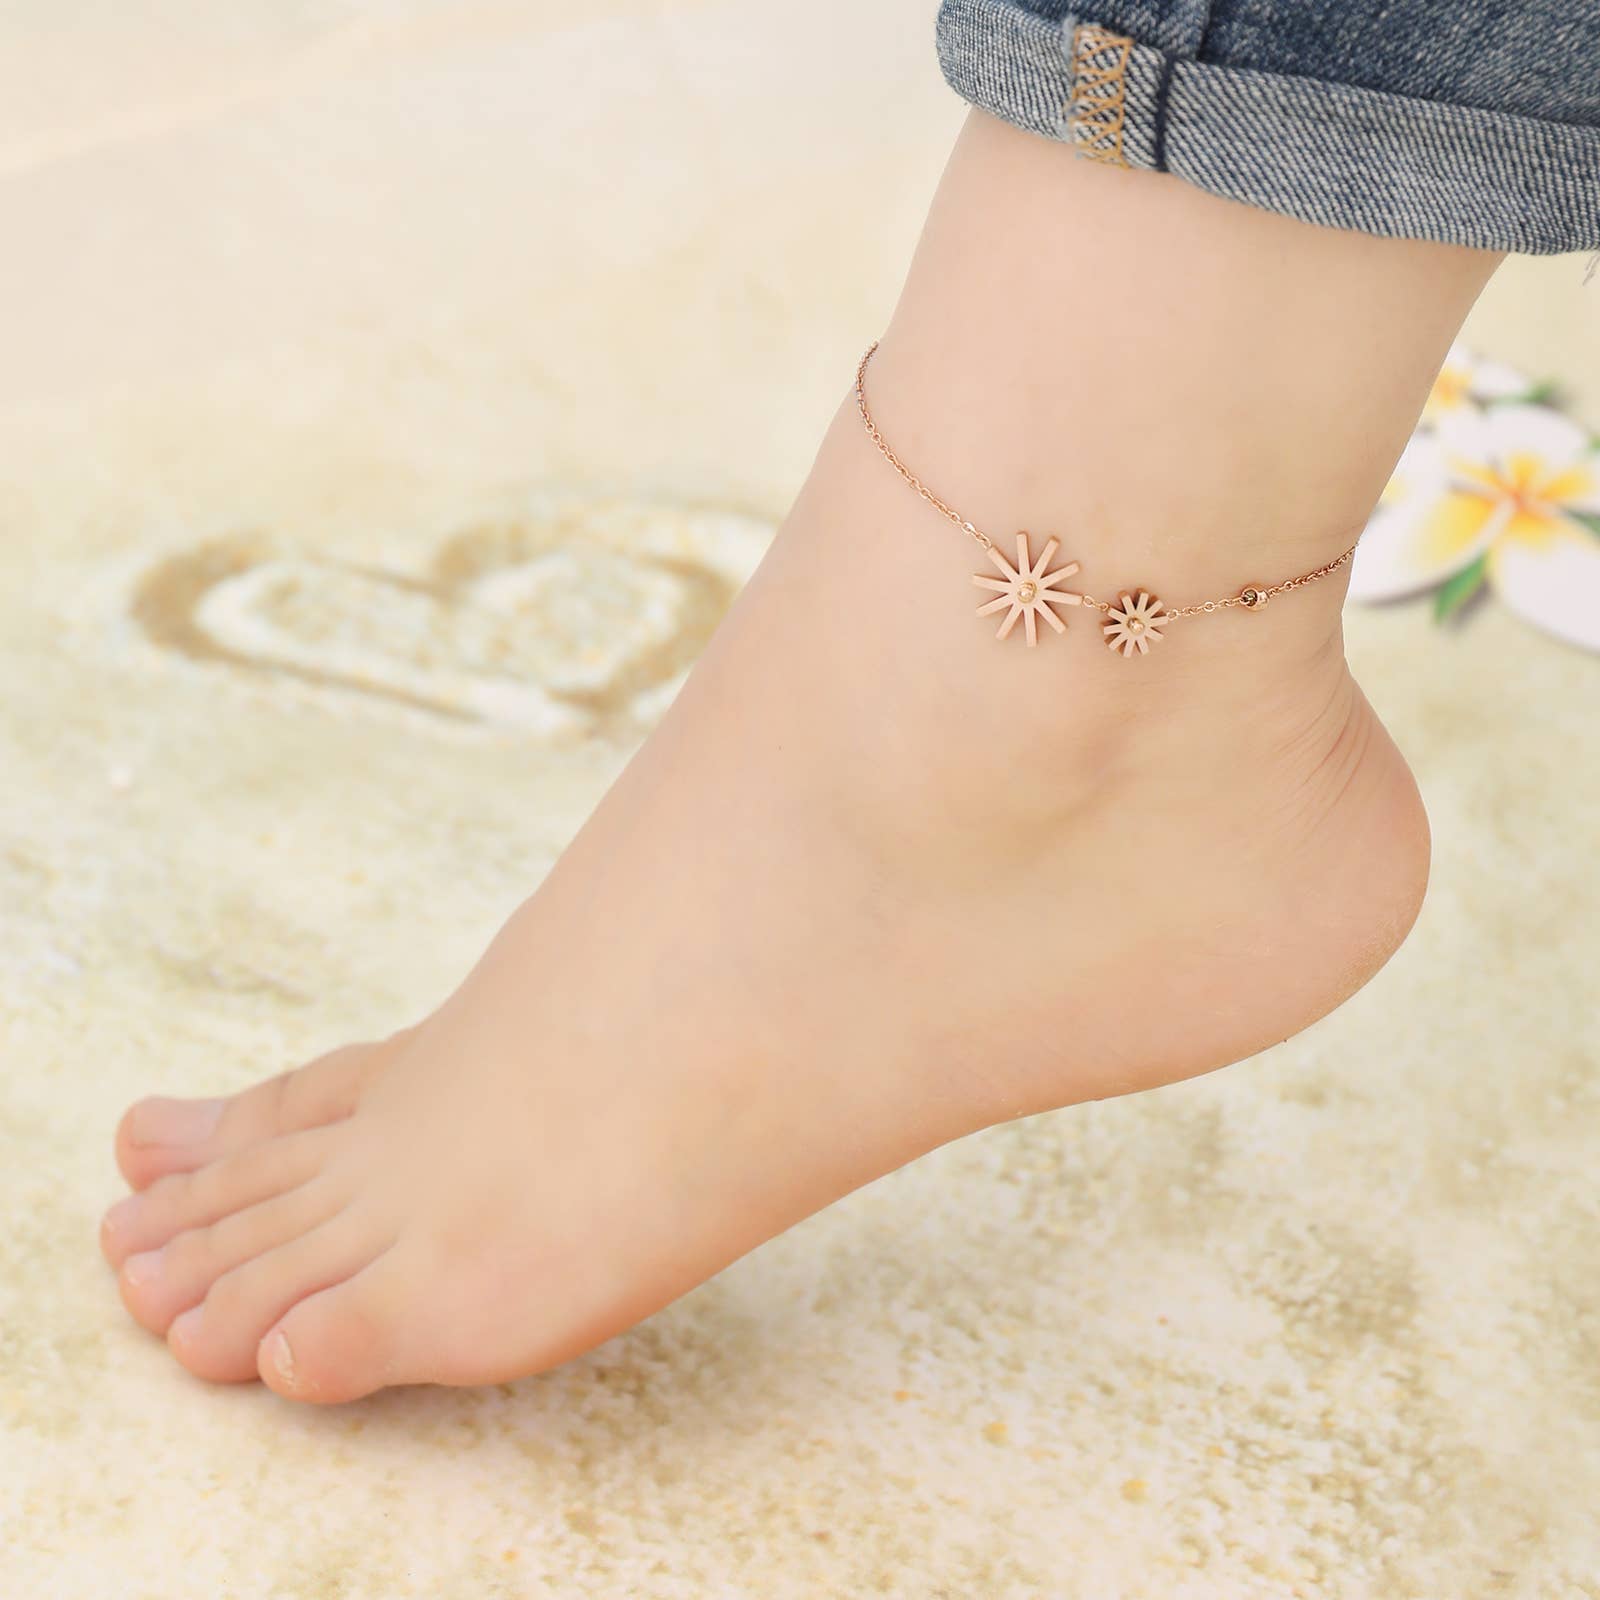 Anklets Go Beyond the Beach - The New York Times